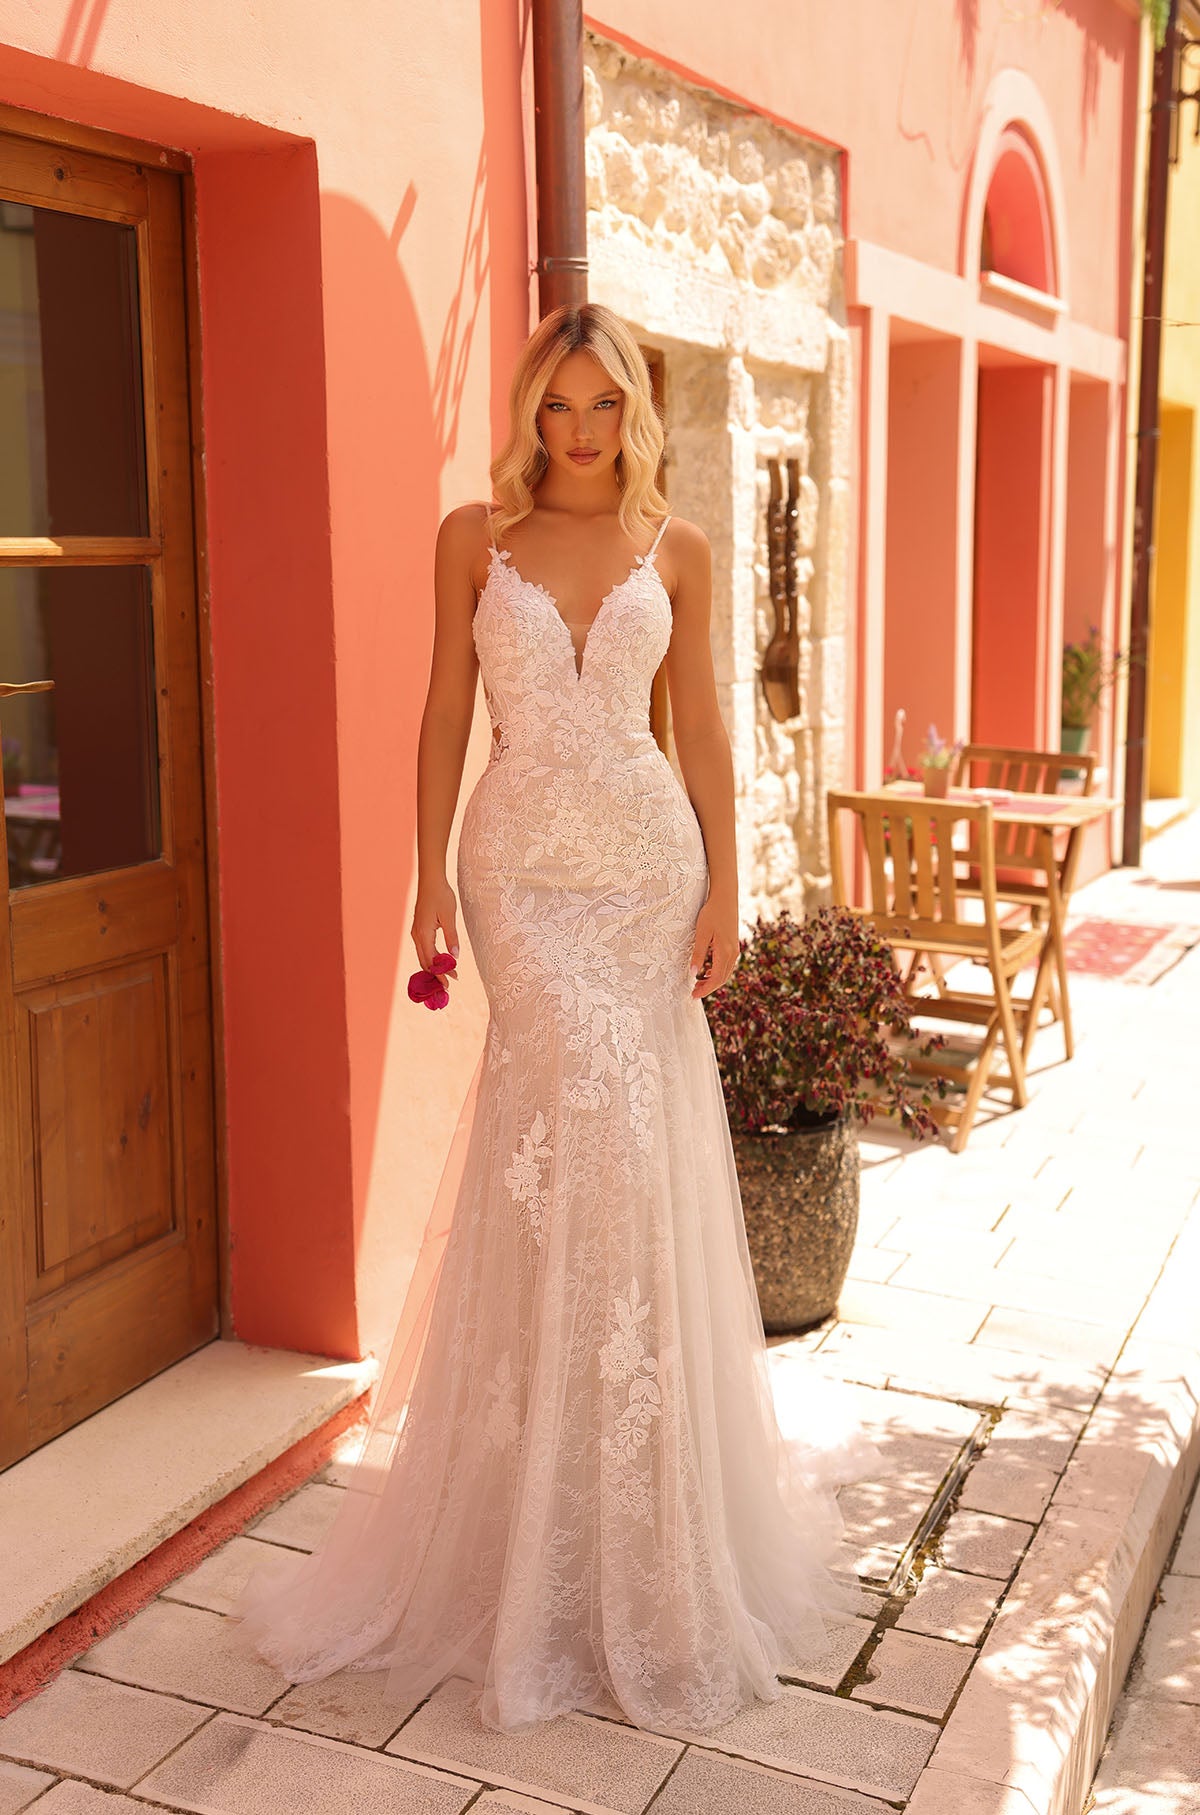 Bridal Gown | Bridal gowns, Gowns, Bridal